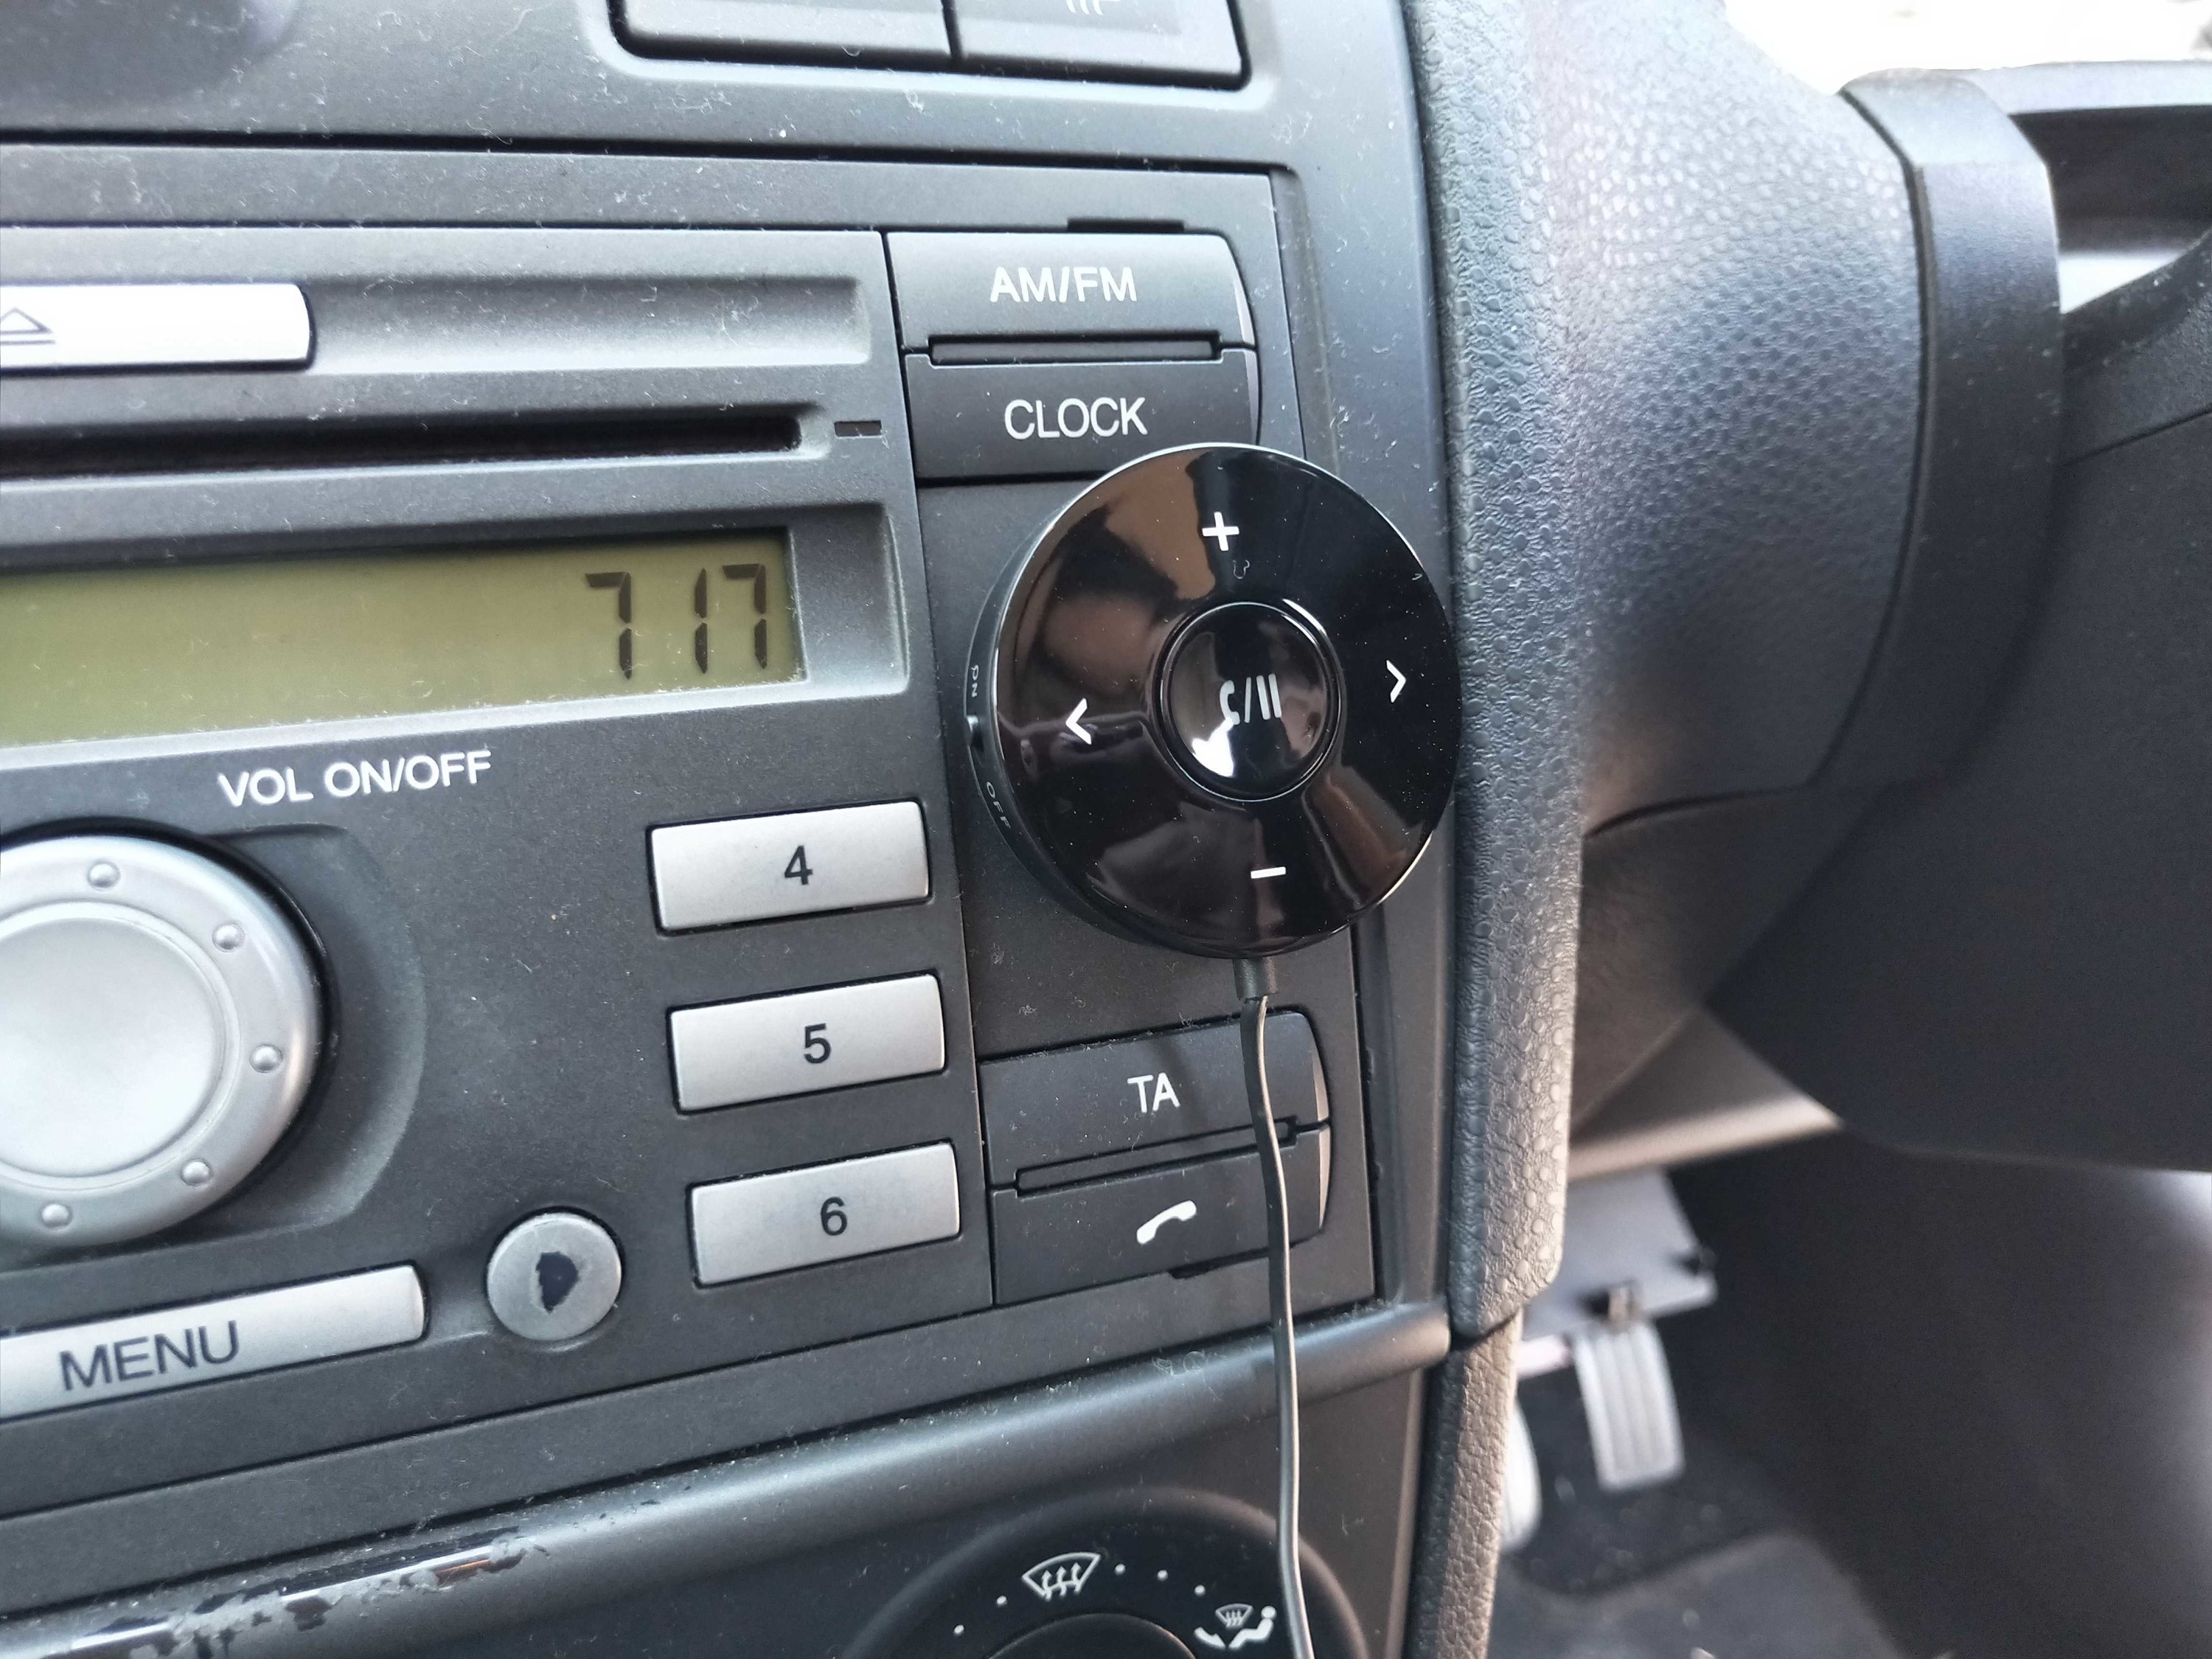 Round Bluetooth receiver attached to car centre console.